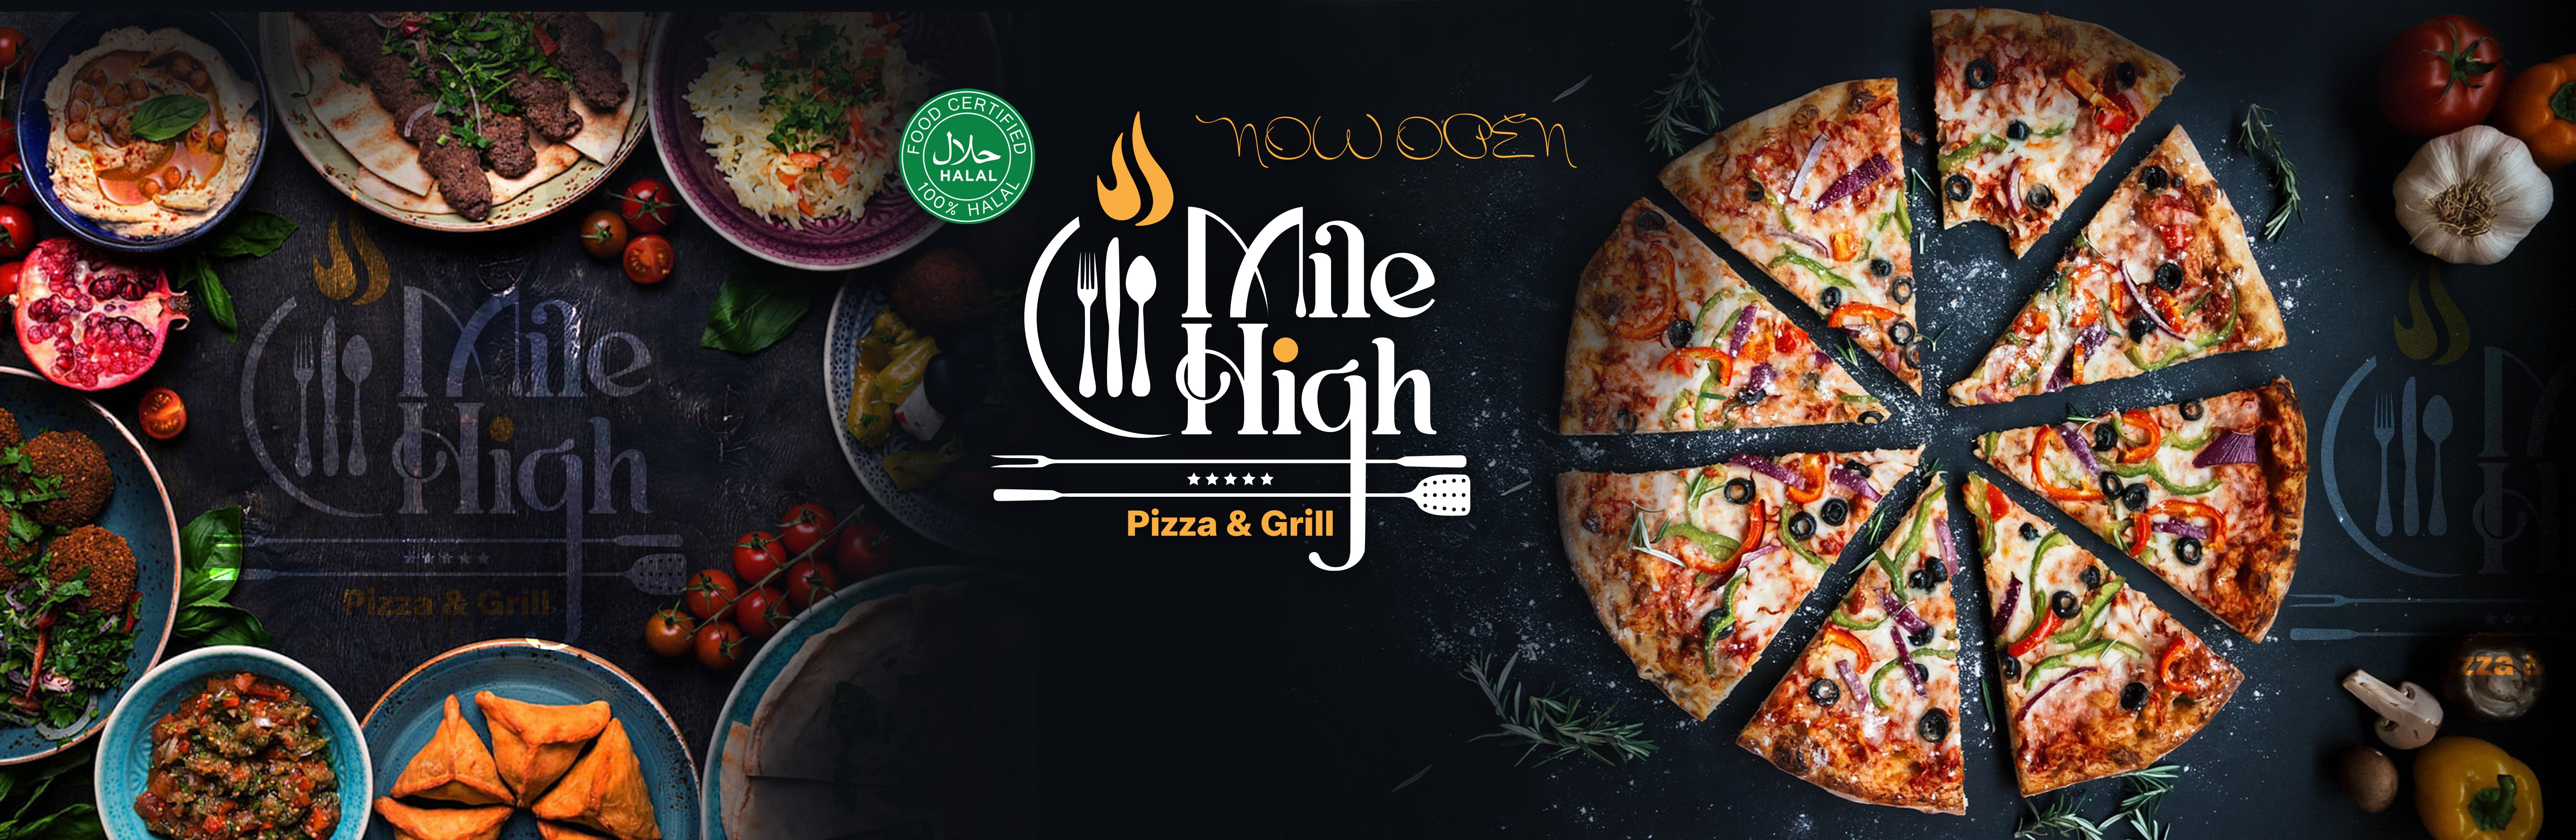 Mile High Pizza & Grill hero